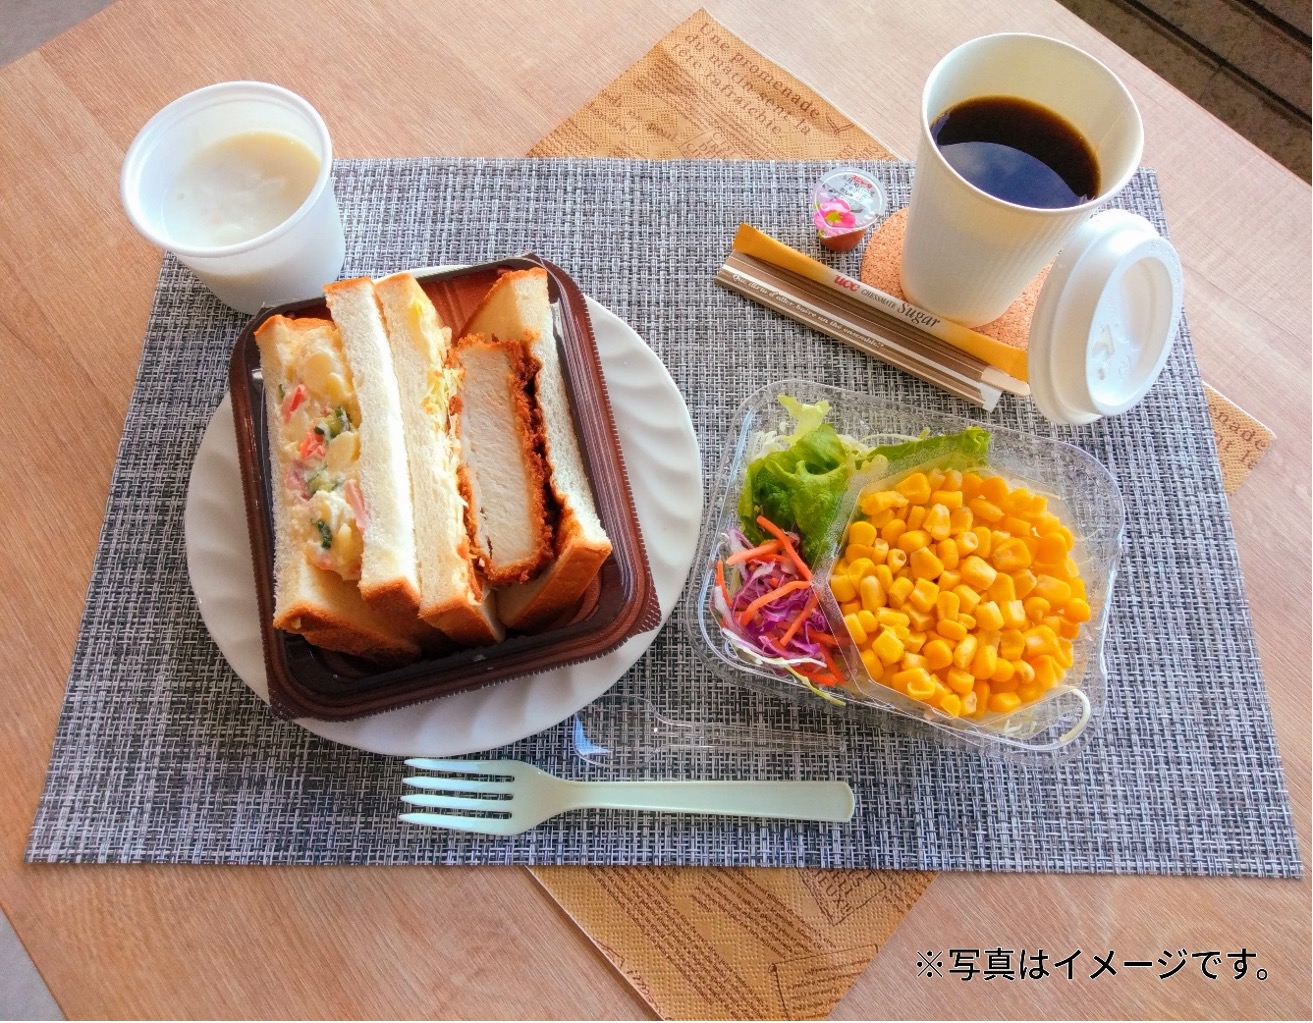 Image of the breakfast